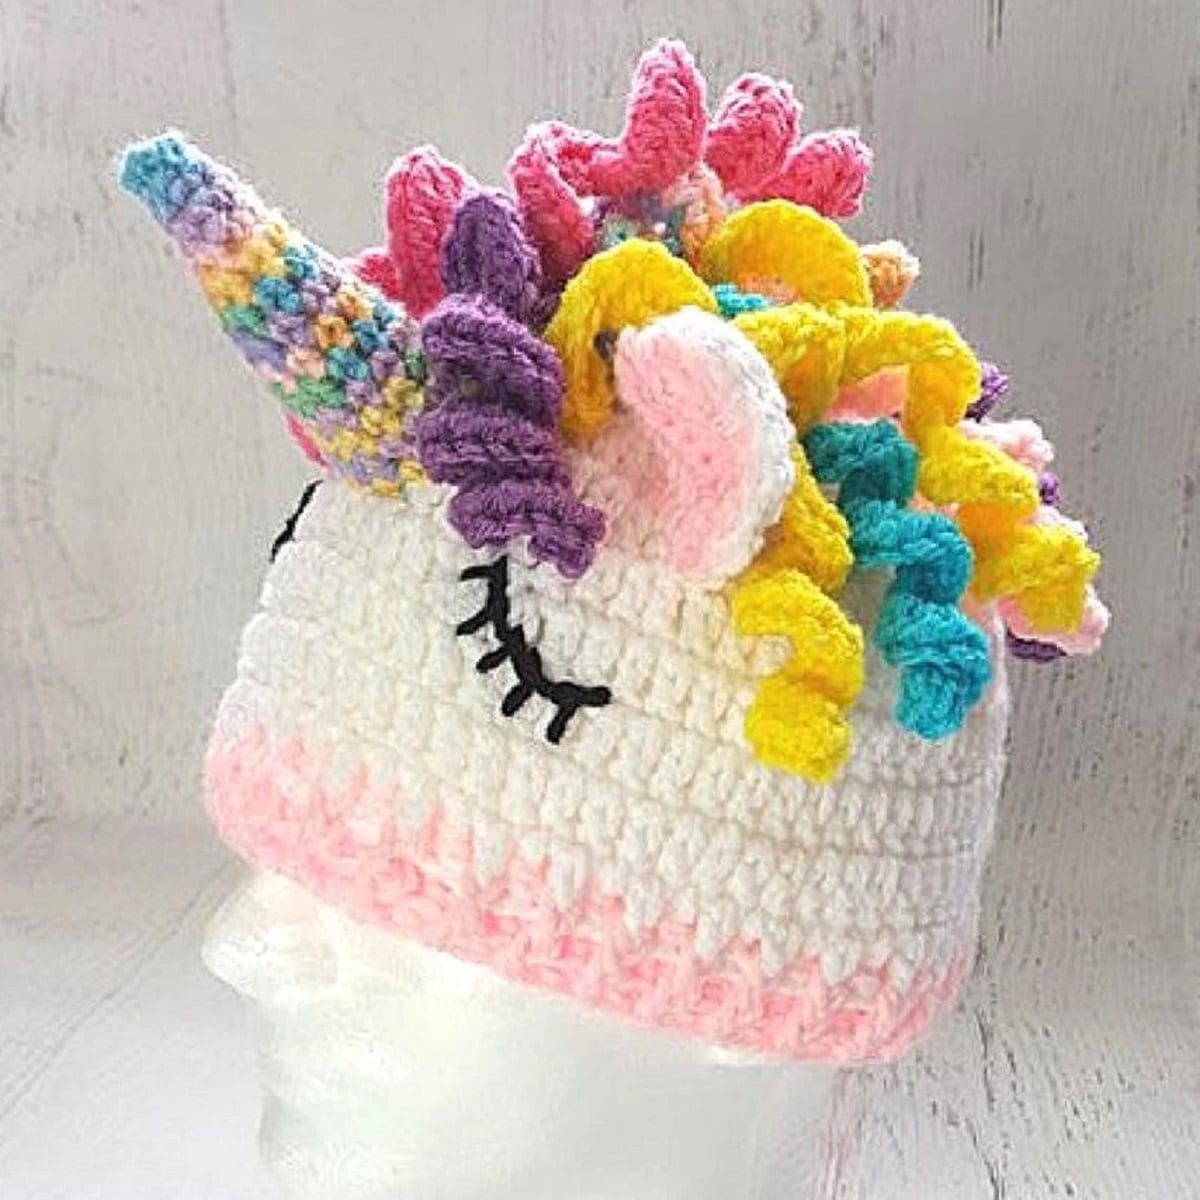 Mannequin wearing a white crochet beanie hat with closed eyes, a multicolored horn, and curled blue, yellow, purple, and pink hair on top.